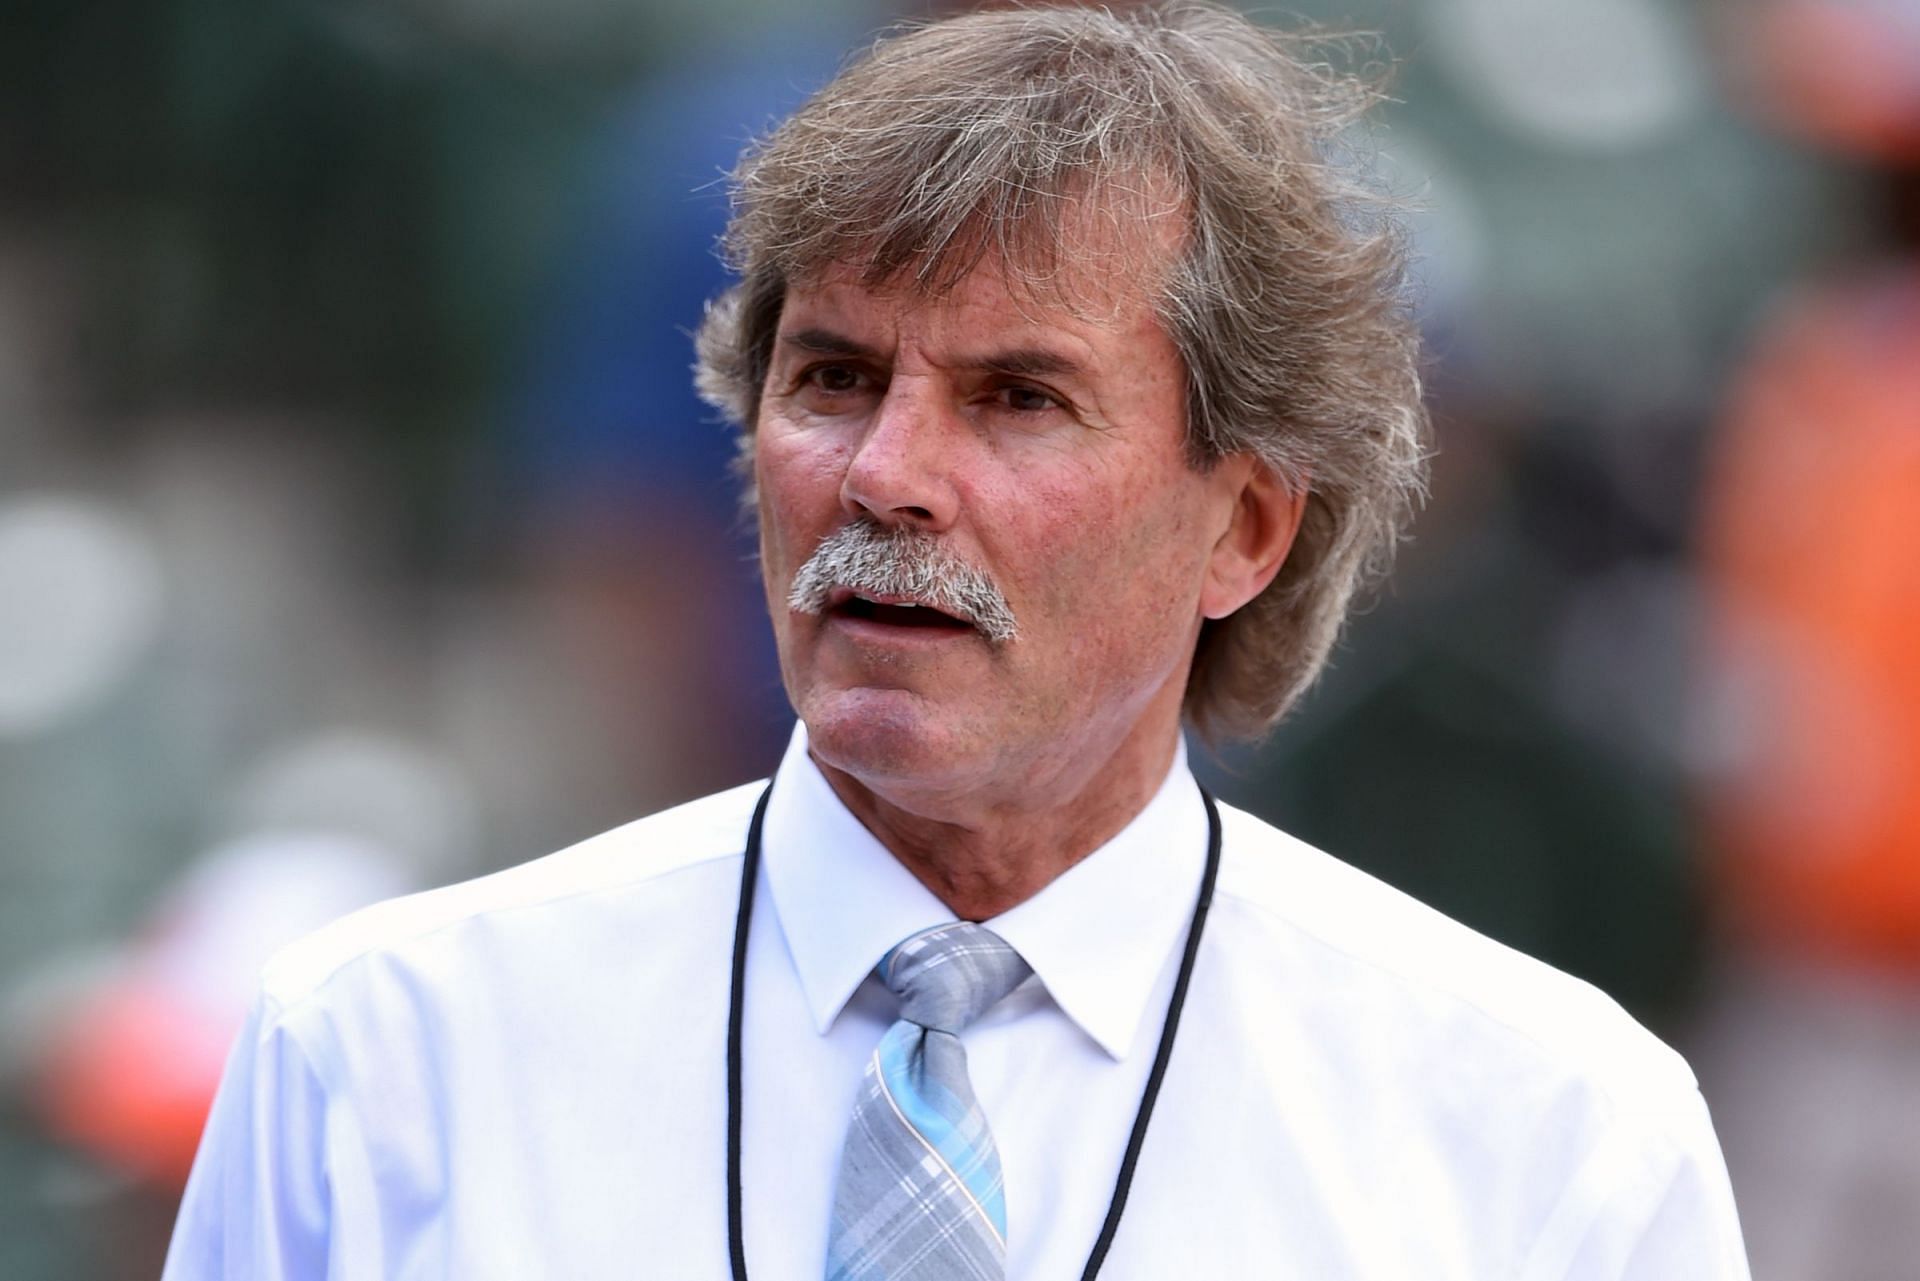 Is George Theberge related to former MLB pitcher Dennis Eckersley?